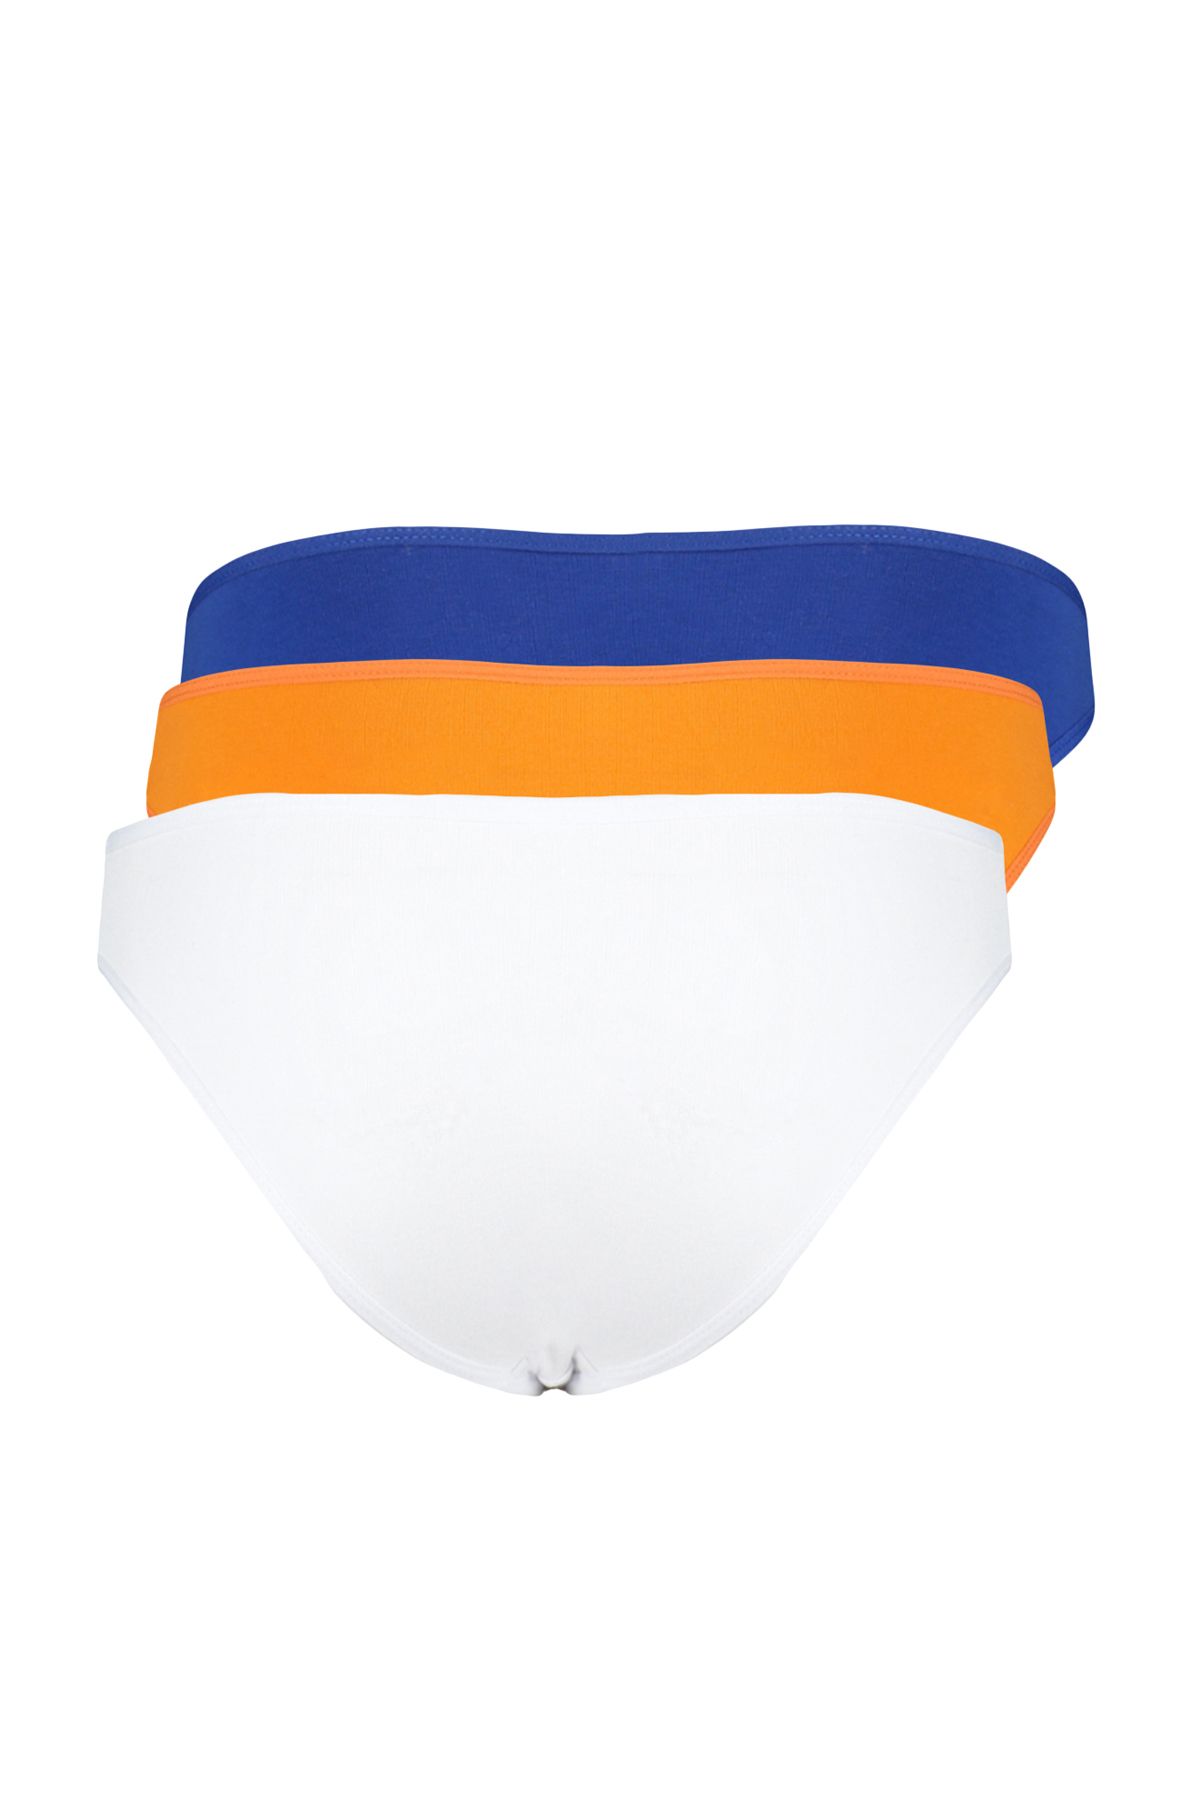 Trendyol Collection White-Orange-Navy Blue 3 Pack Cotton Classic Knitted  Panties THMAW24KU00007 - Trendyol